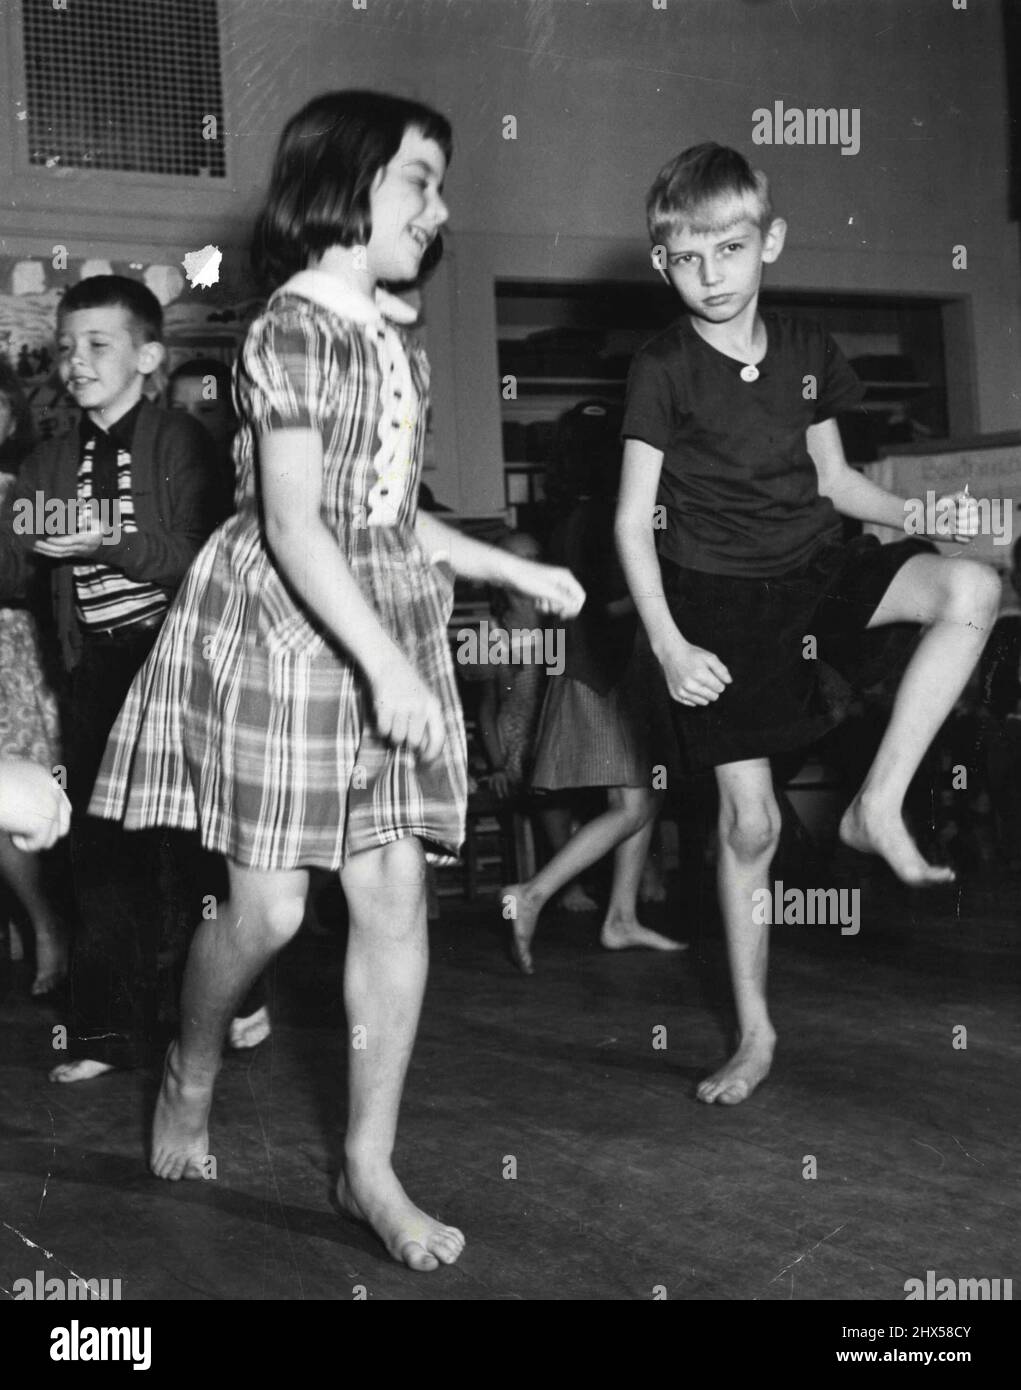 A leading British authority on theatre for young people reports interesting results when dance-drama is introduced to Australian schools and clubs. June 29, 1949. (Photo by ACME). Stock Photo